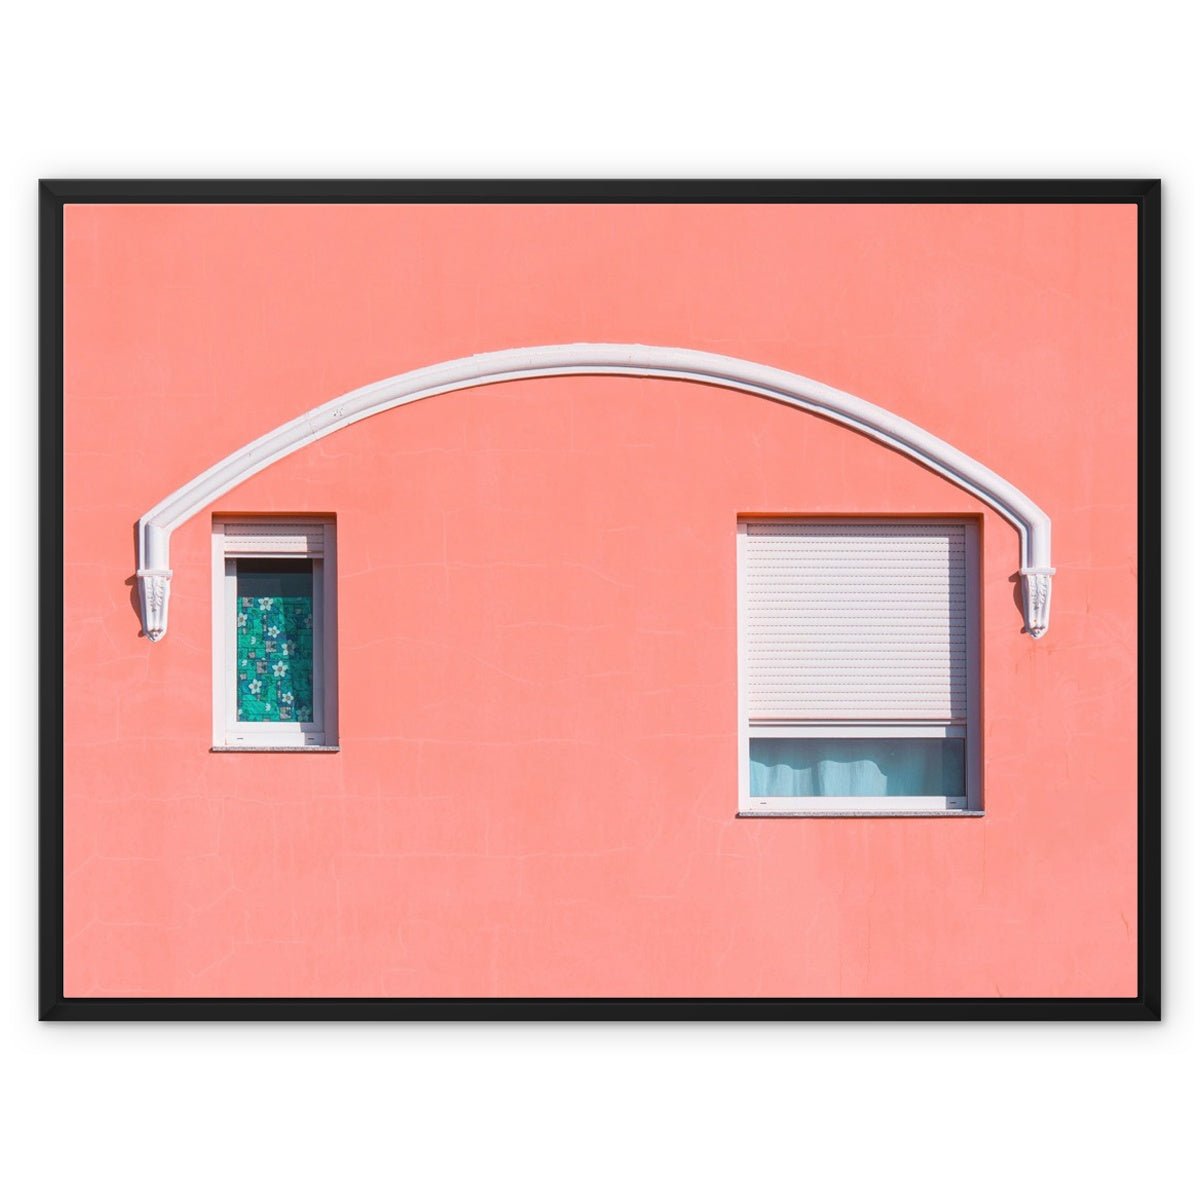 Bit of This 7 7 - Architectural Canvas Print by doingly